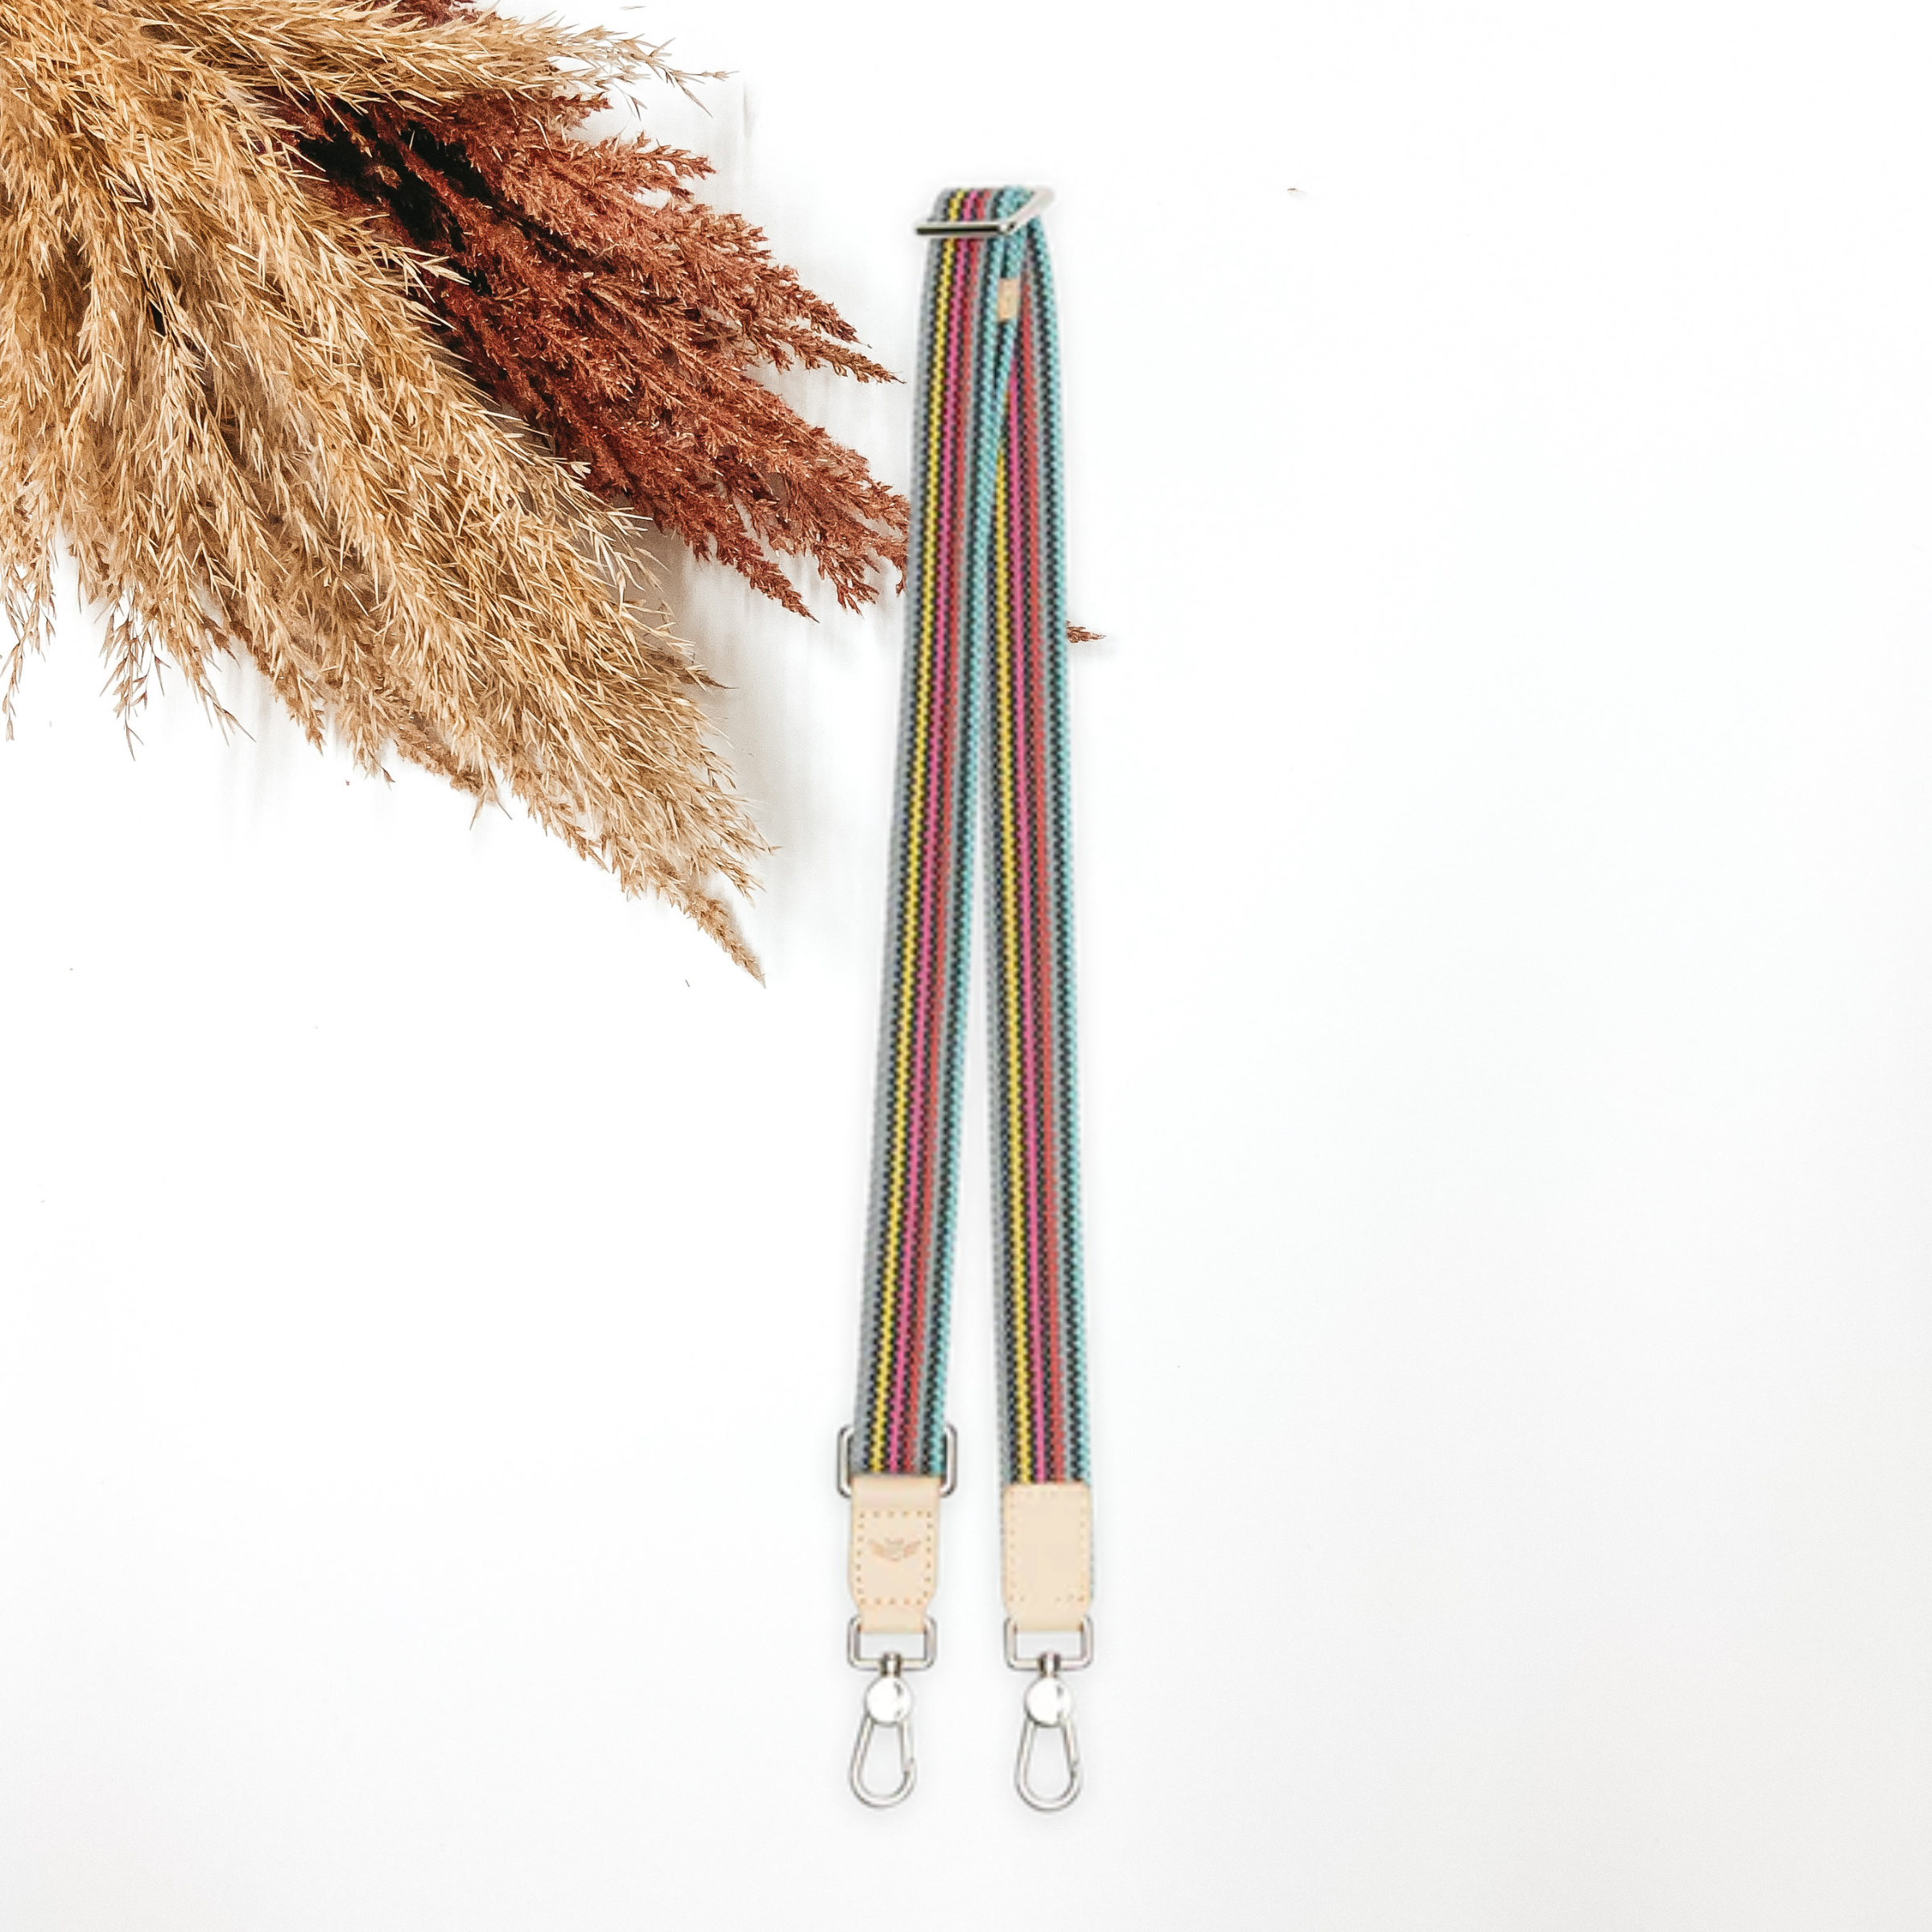 A woven multicolored purse strap that has a main color of grey. This purse strap is pictured on a white background with tan and brown pompous grass in the top left corner.